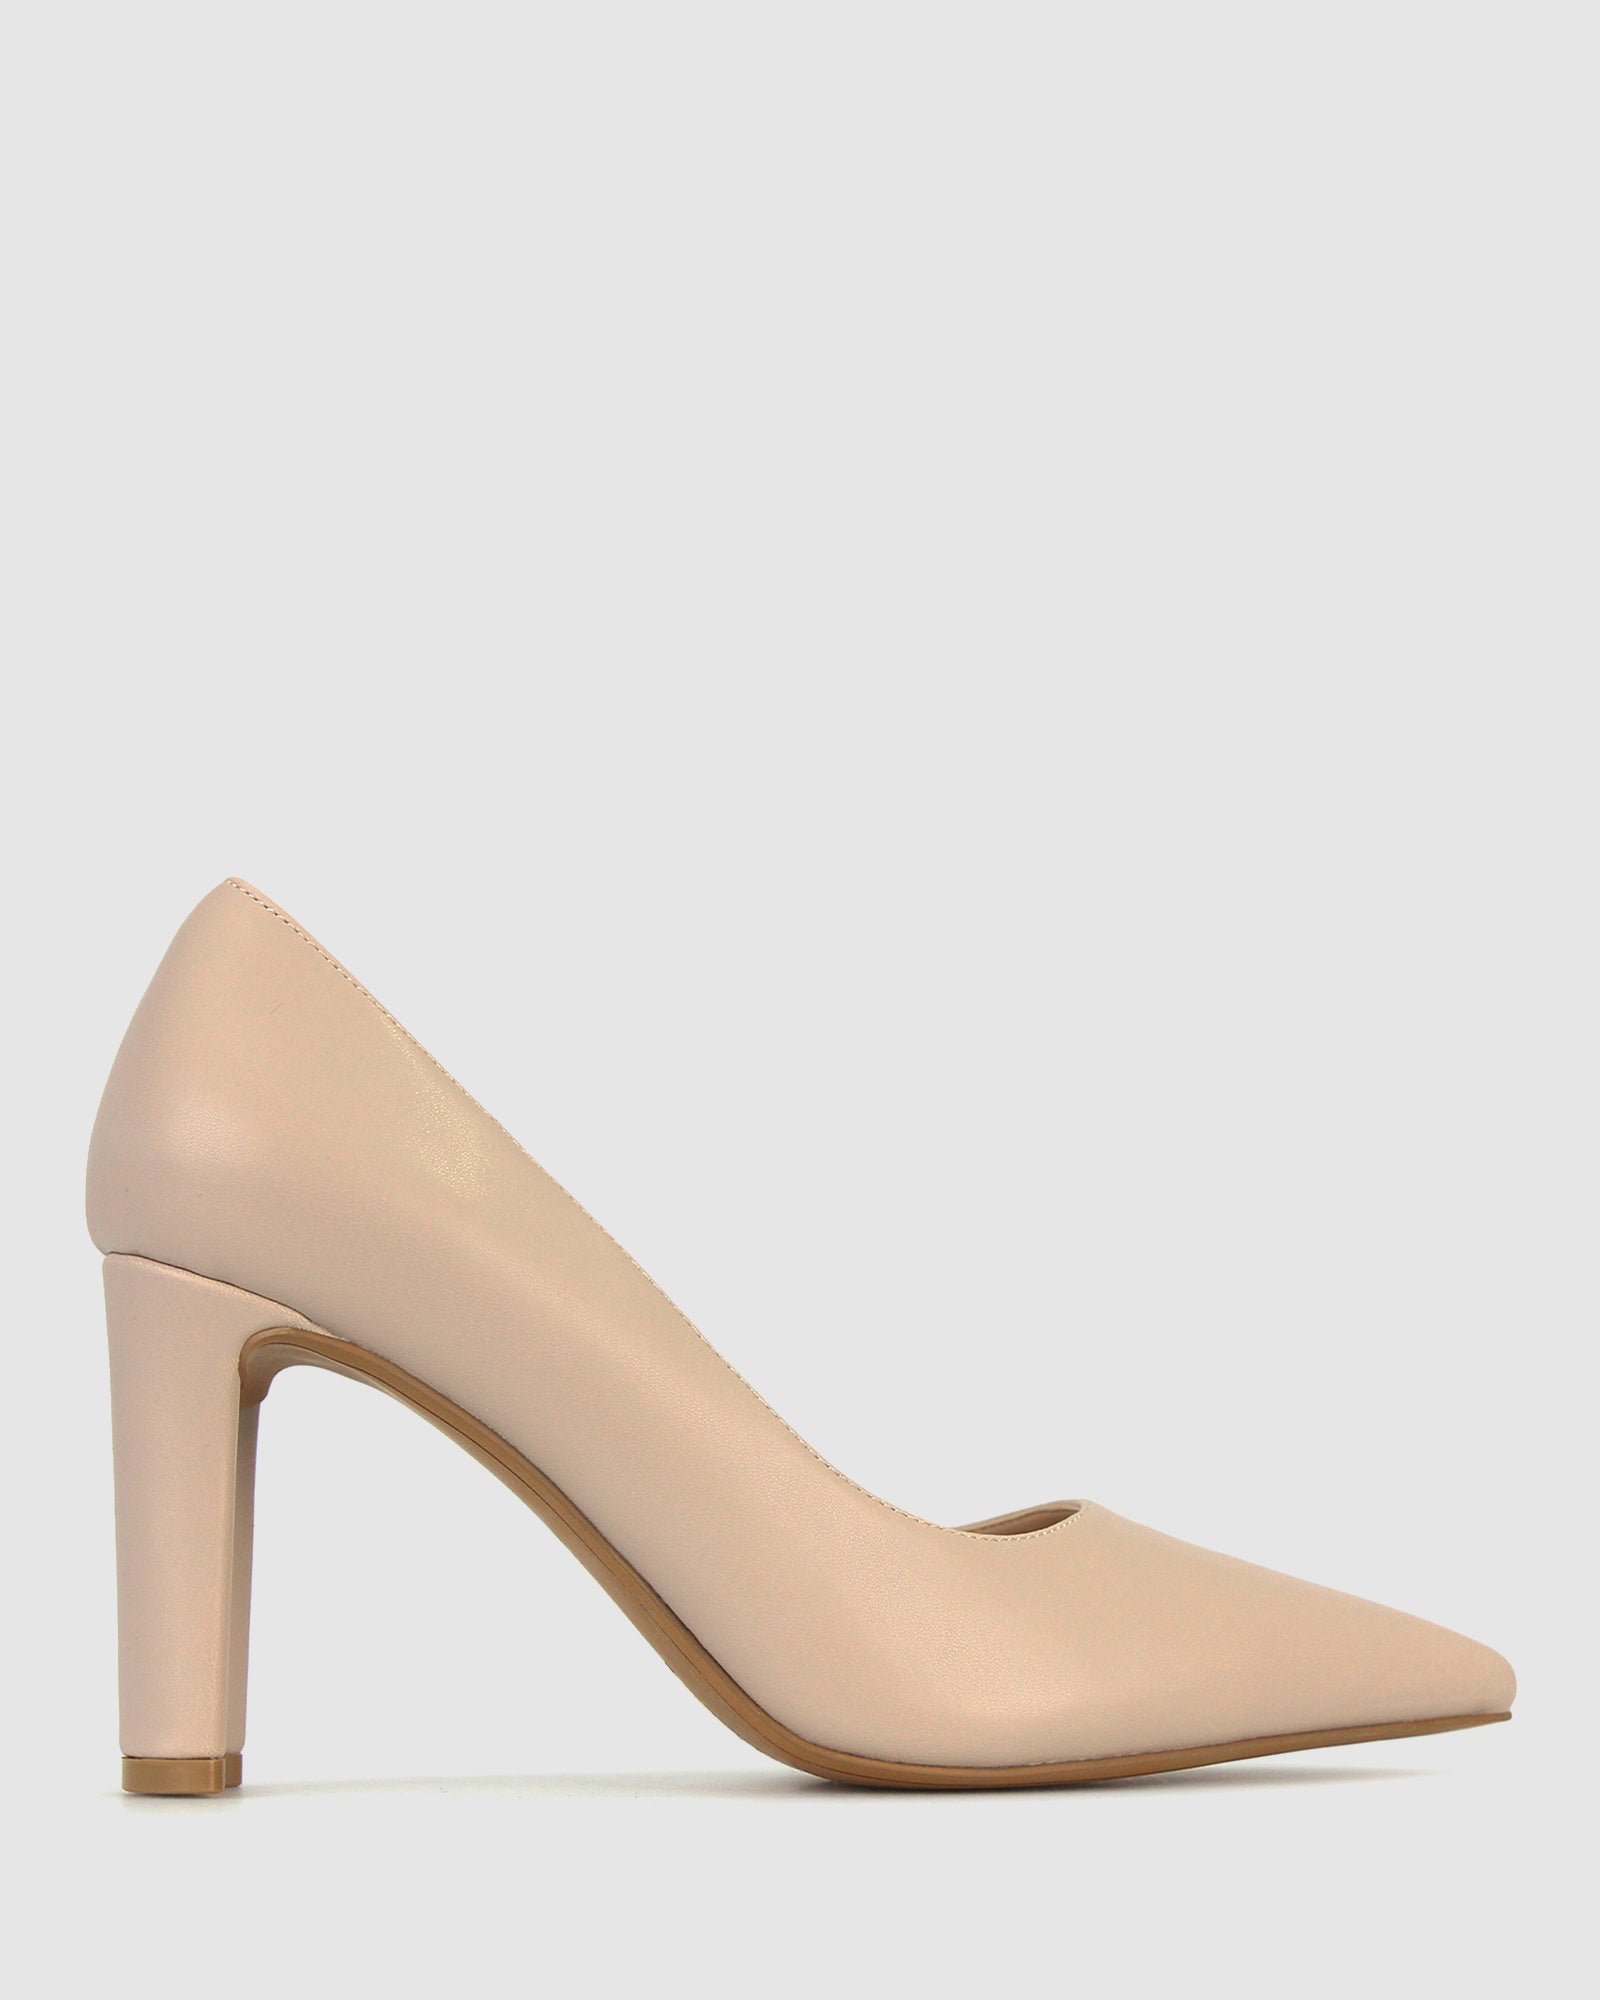 Buy MIGHT Pointed Toe Pumps by Betts online - Betts